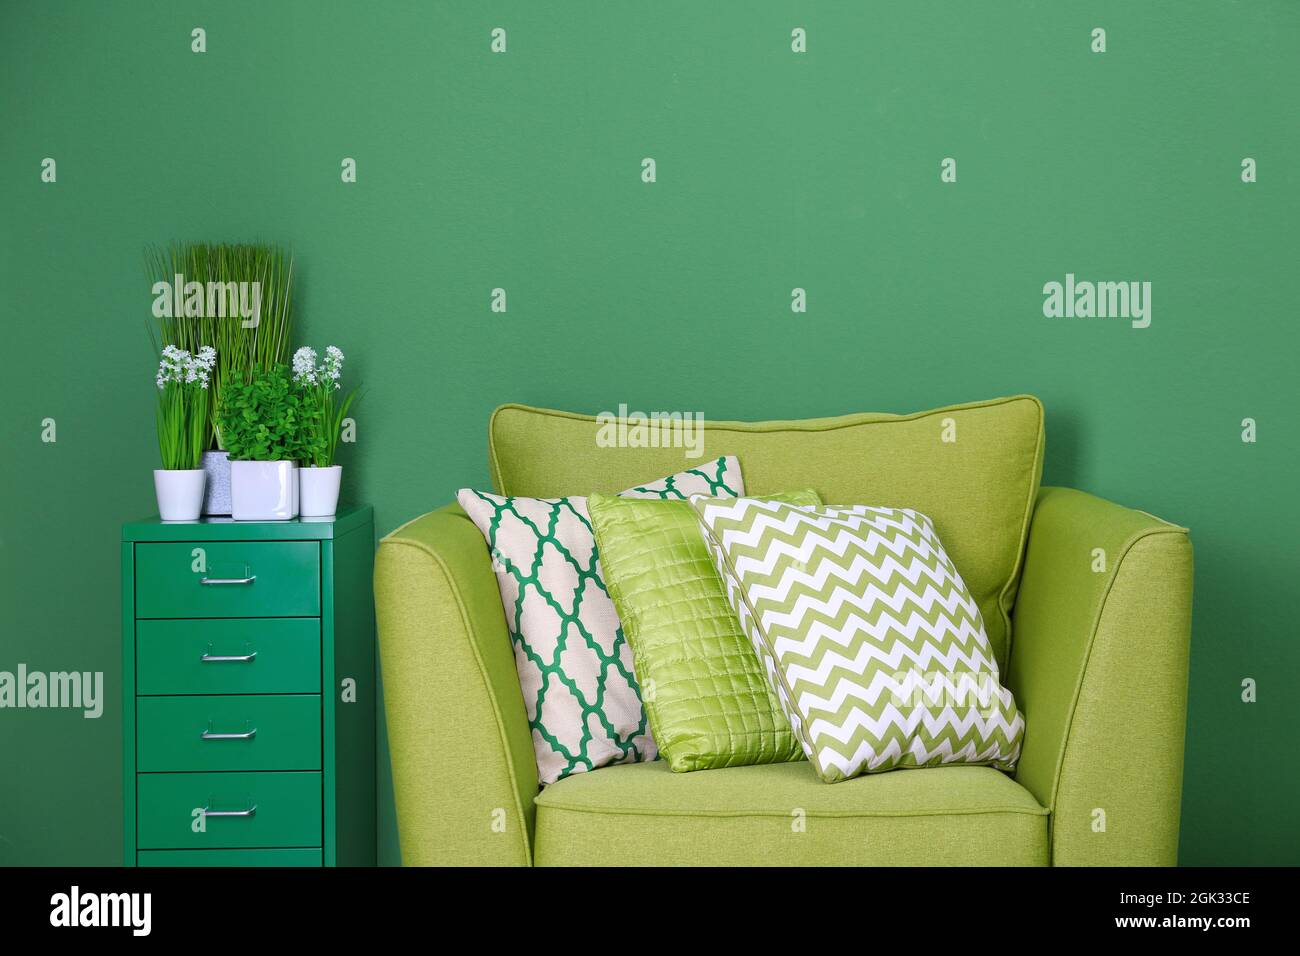 Cozy armchair with pillows on green background Stock Photo - Alamy